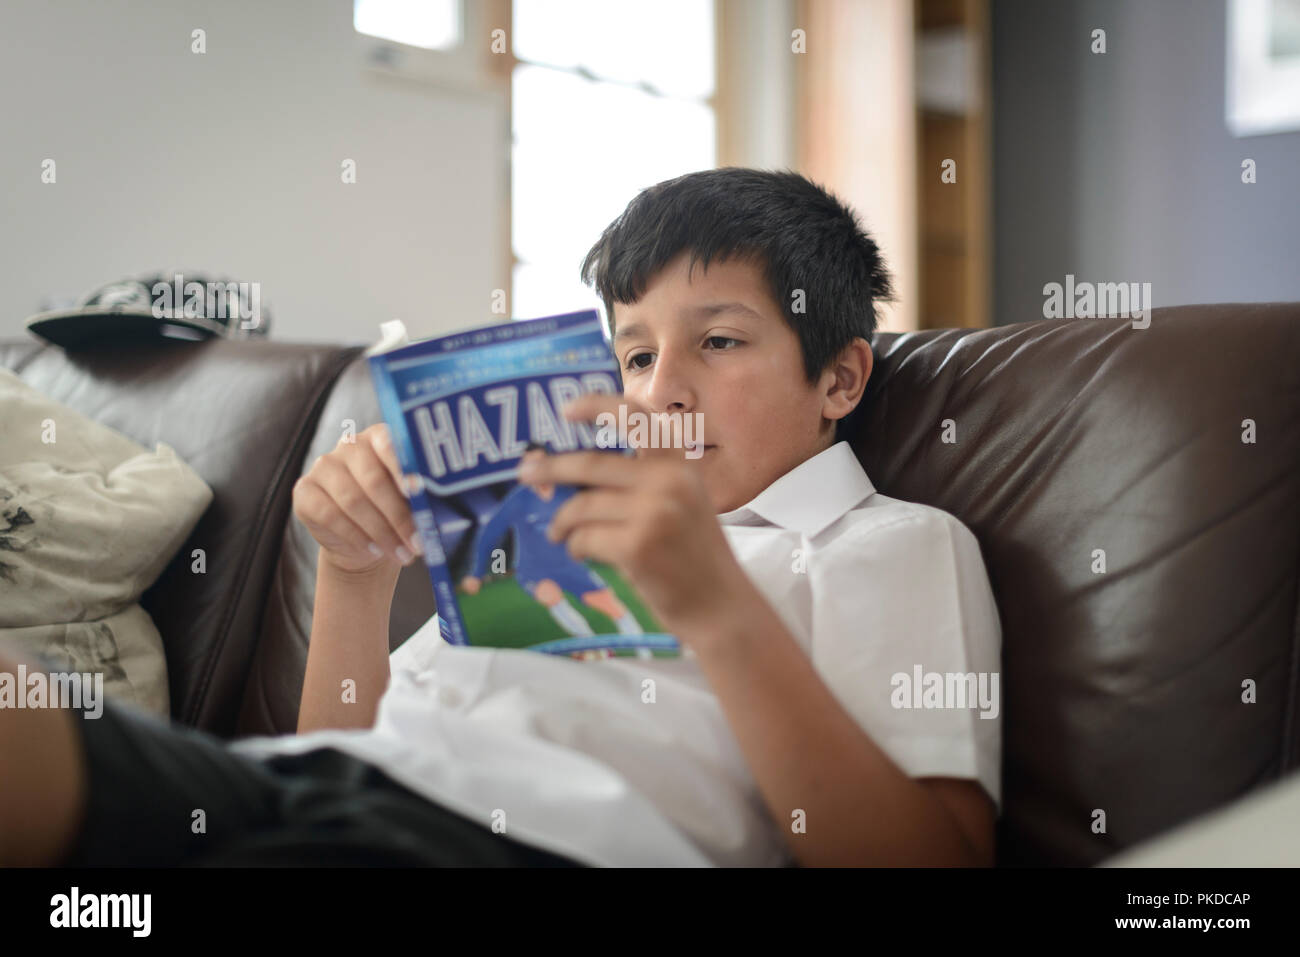 Surrey,UK-Young boy in school uniform  reading football book at home Stock Photo